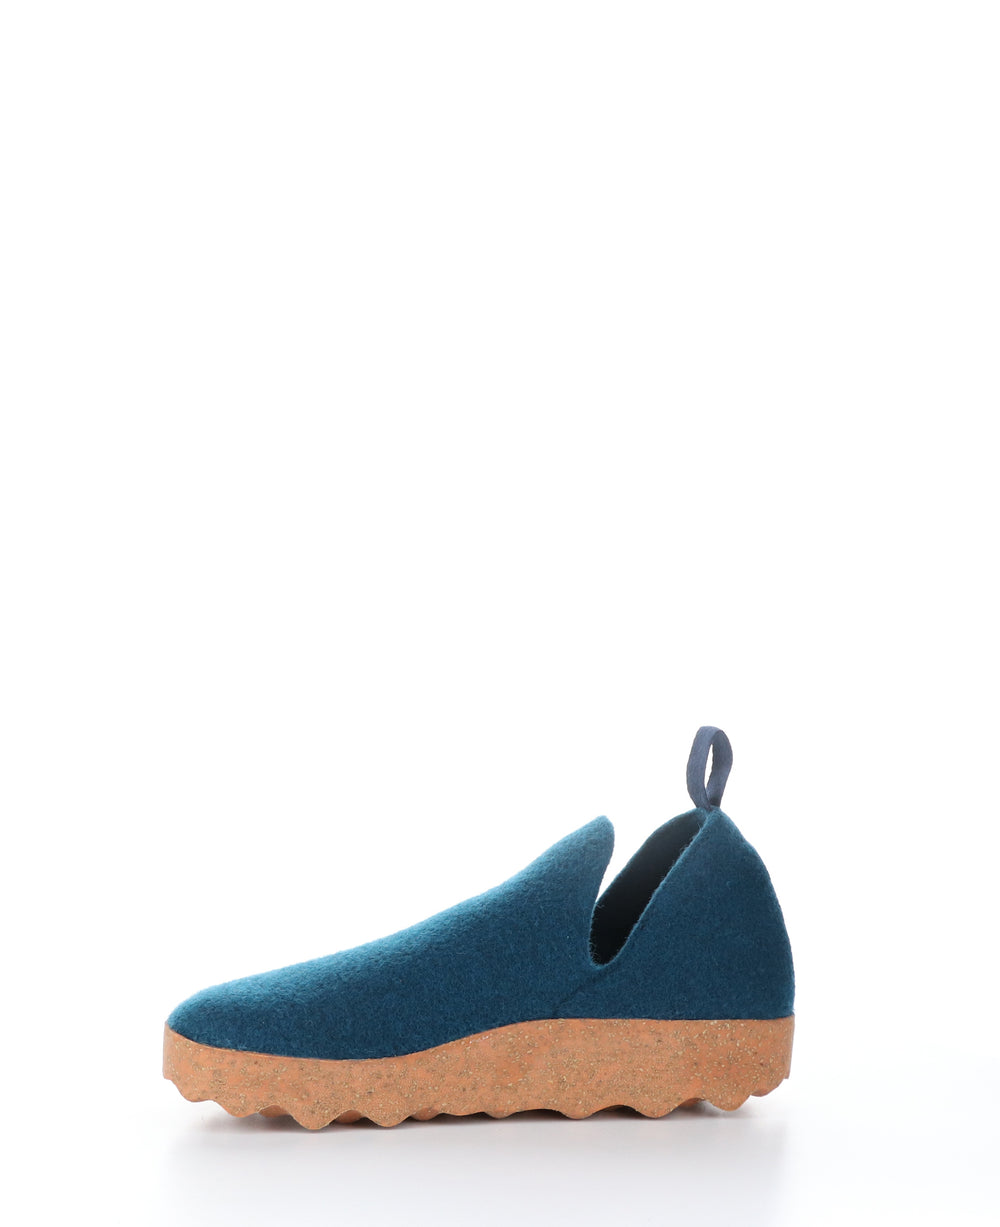 CITY Peacock Blue Round Toe Shoes|CITY Chaussures à Bout Rond in Bleu